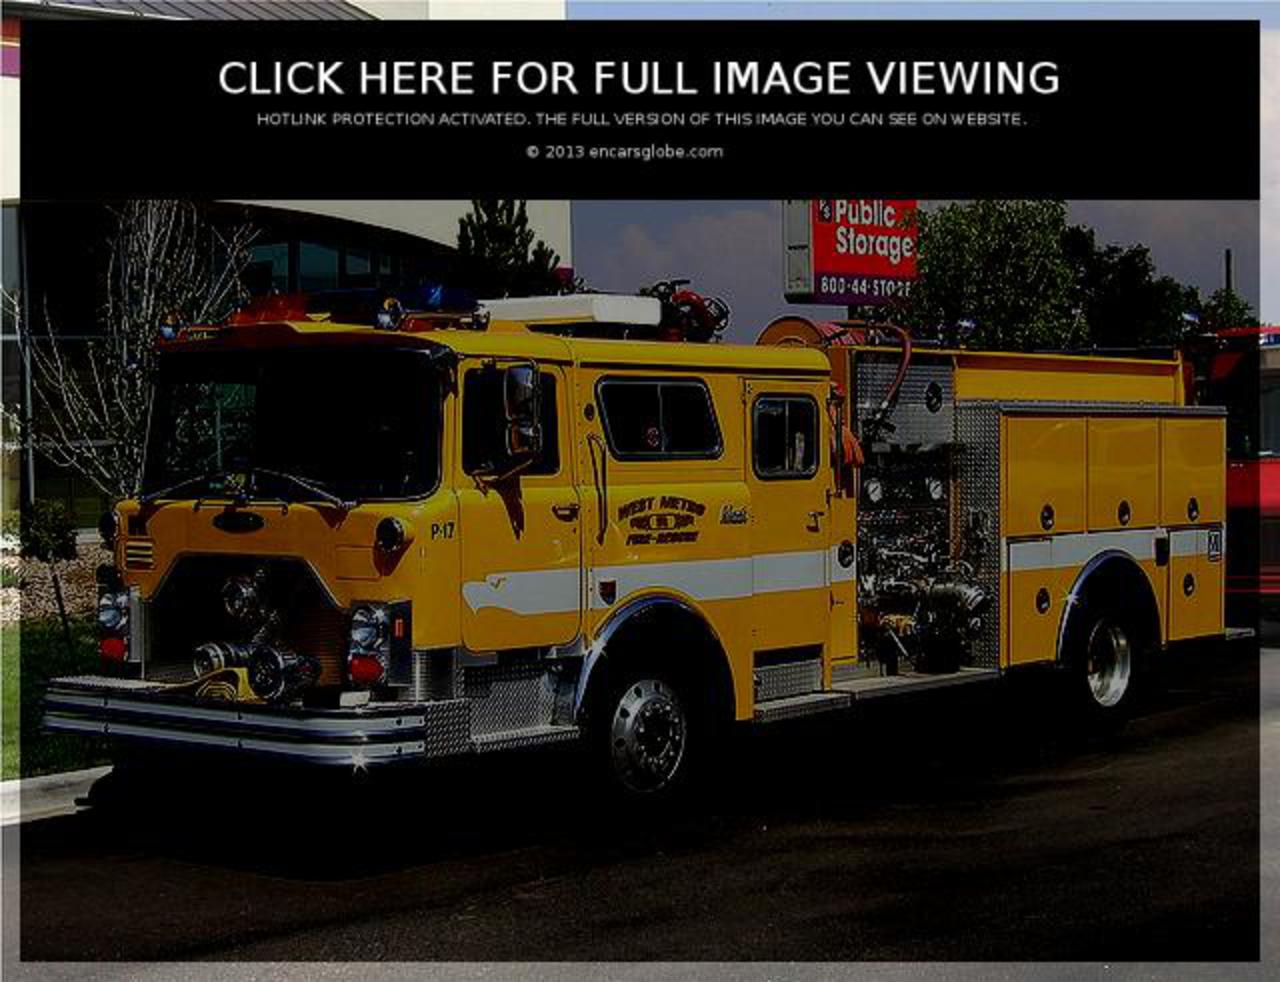 Pierce FireRescue Pumper Photo Gallery: Photo #04 out of 9, Image ...